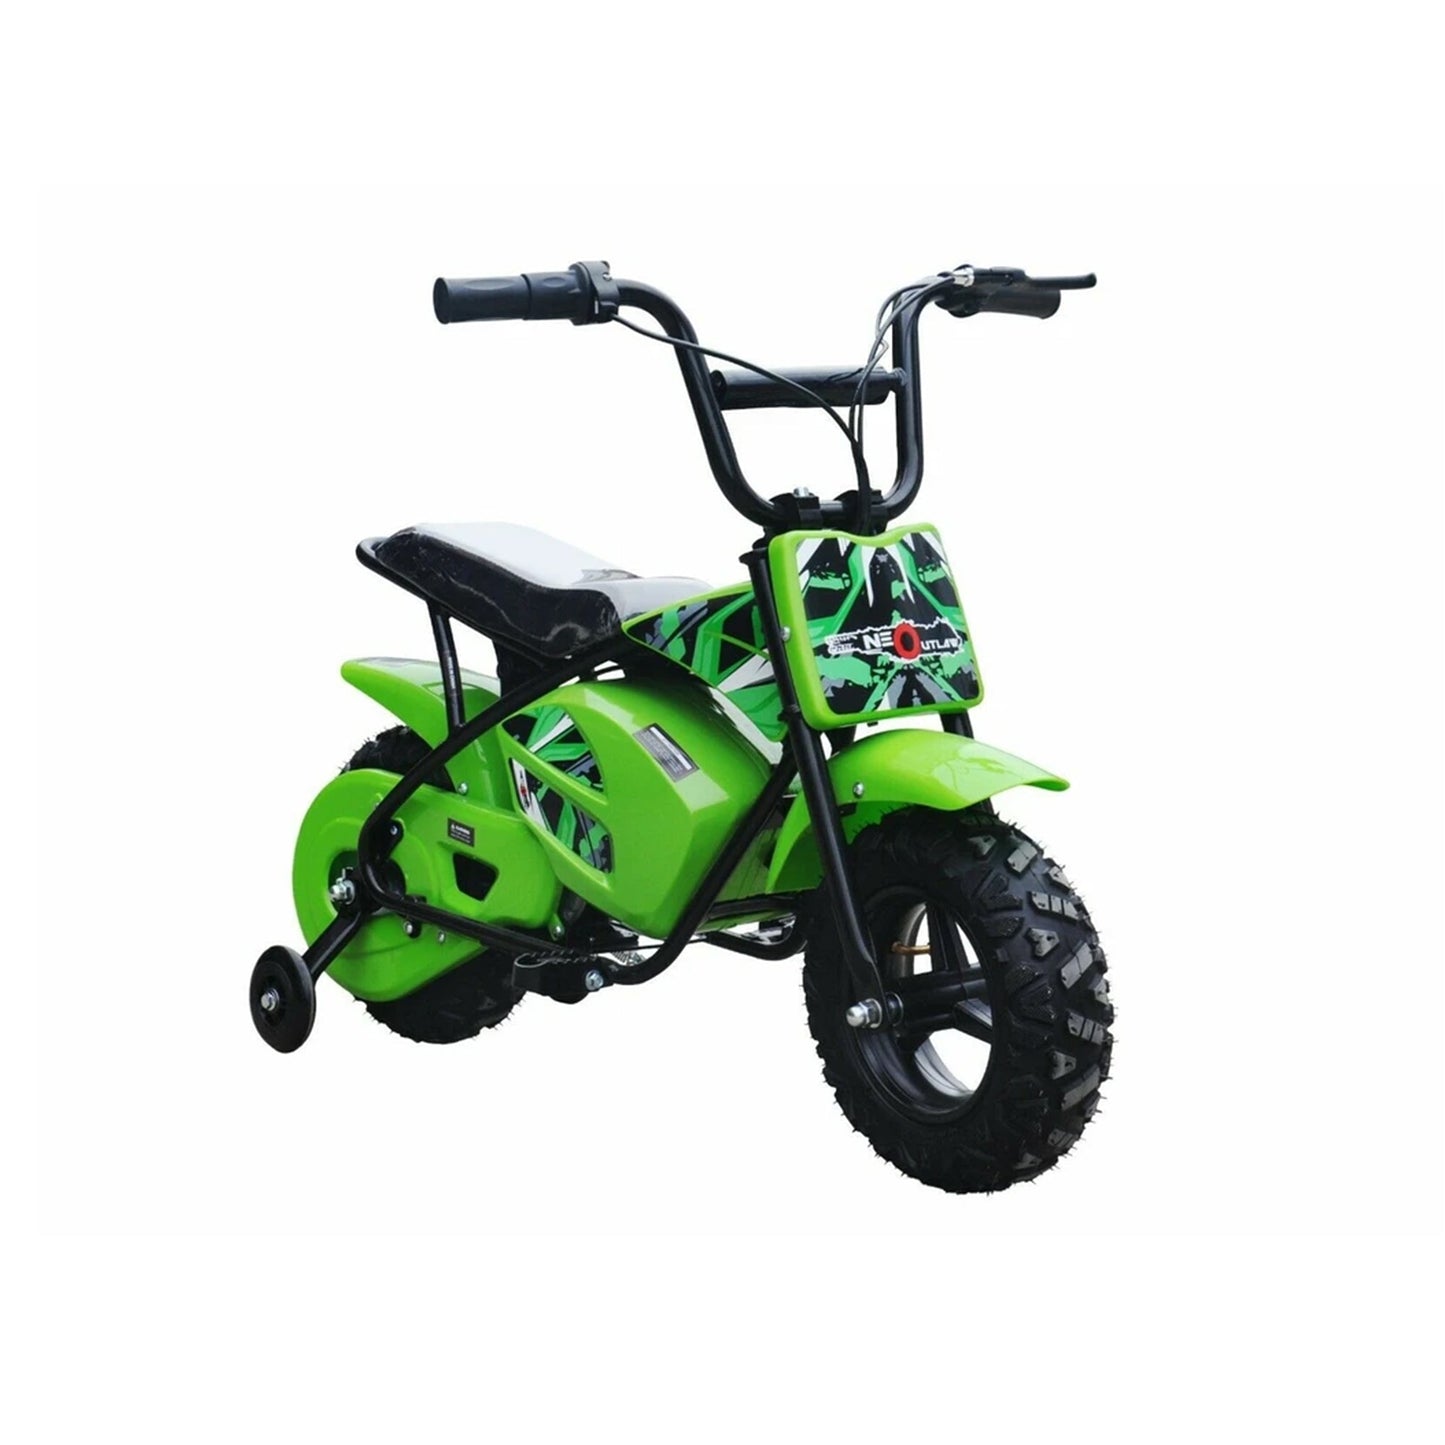 "Green Mini Dirtbike Scrambler, Kids Electric Ride on, 250 Watt 12 Volt by Kids Dirt Bike with an electric twist and go throttle. Isolated on a white background."